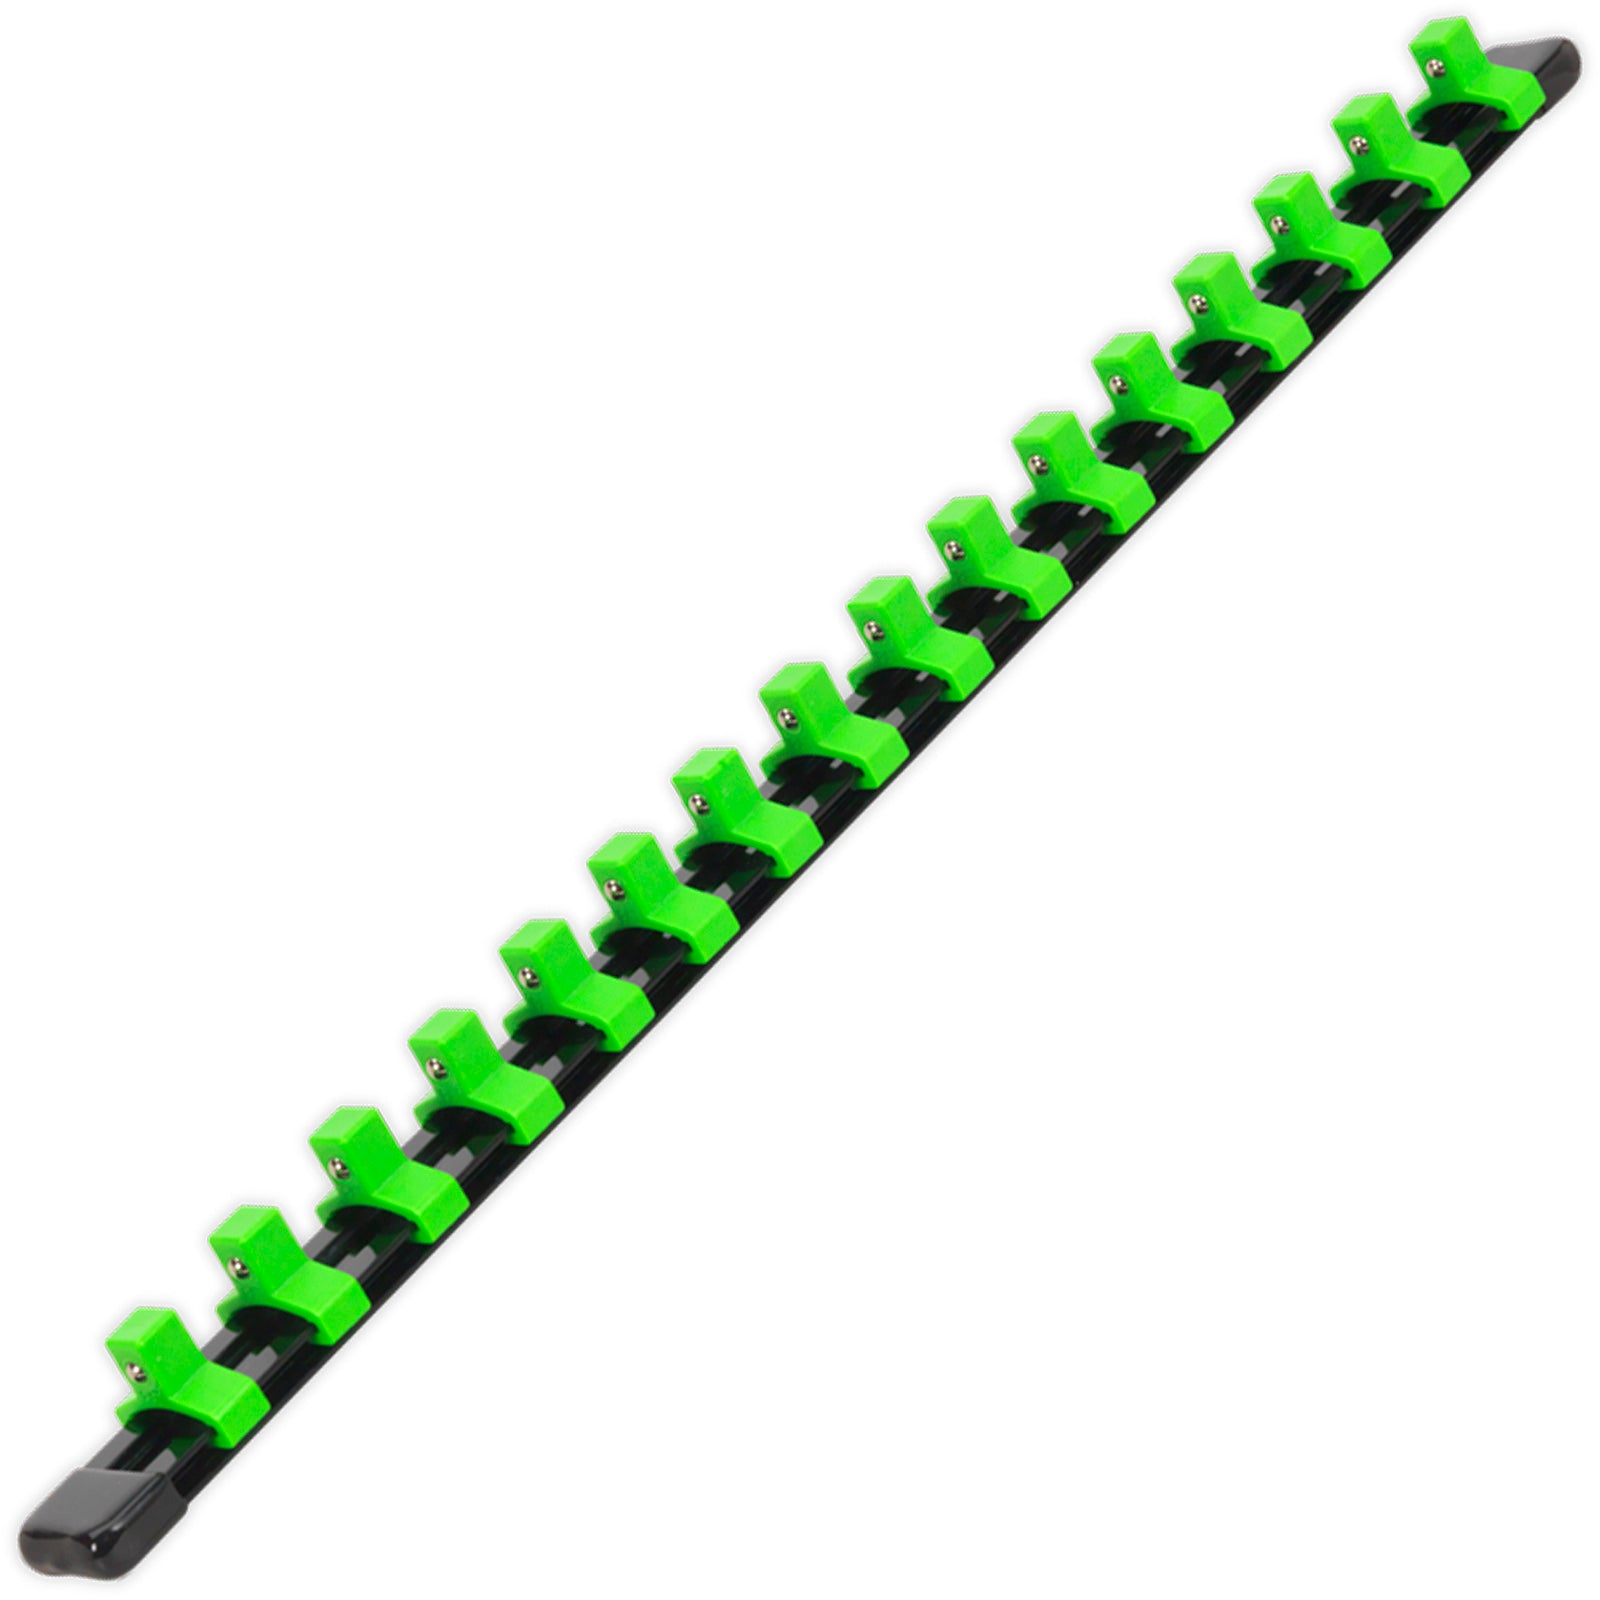 Sealey Premier High Visibilty Green Socket Retaining Rail With 16 Clips